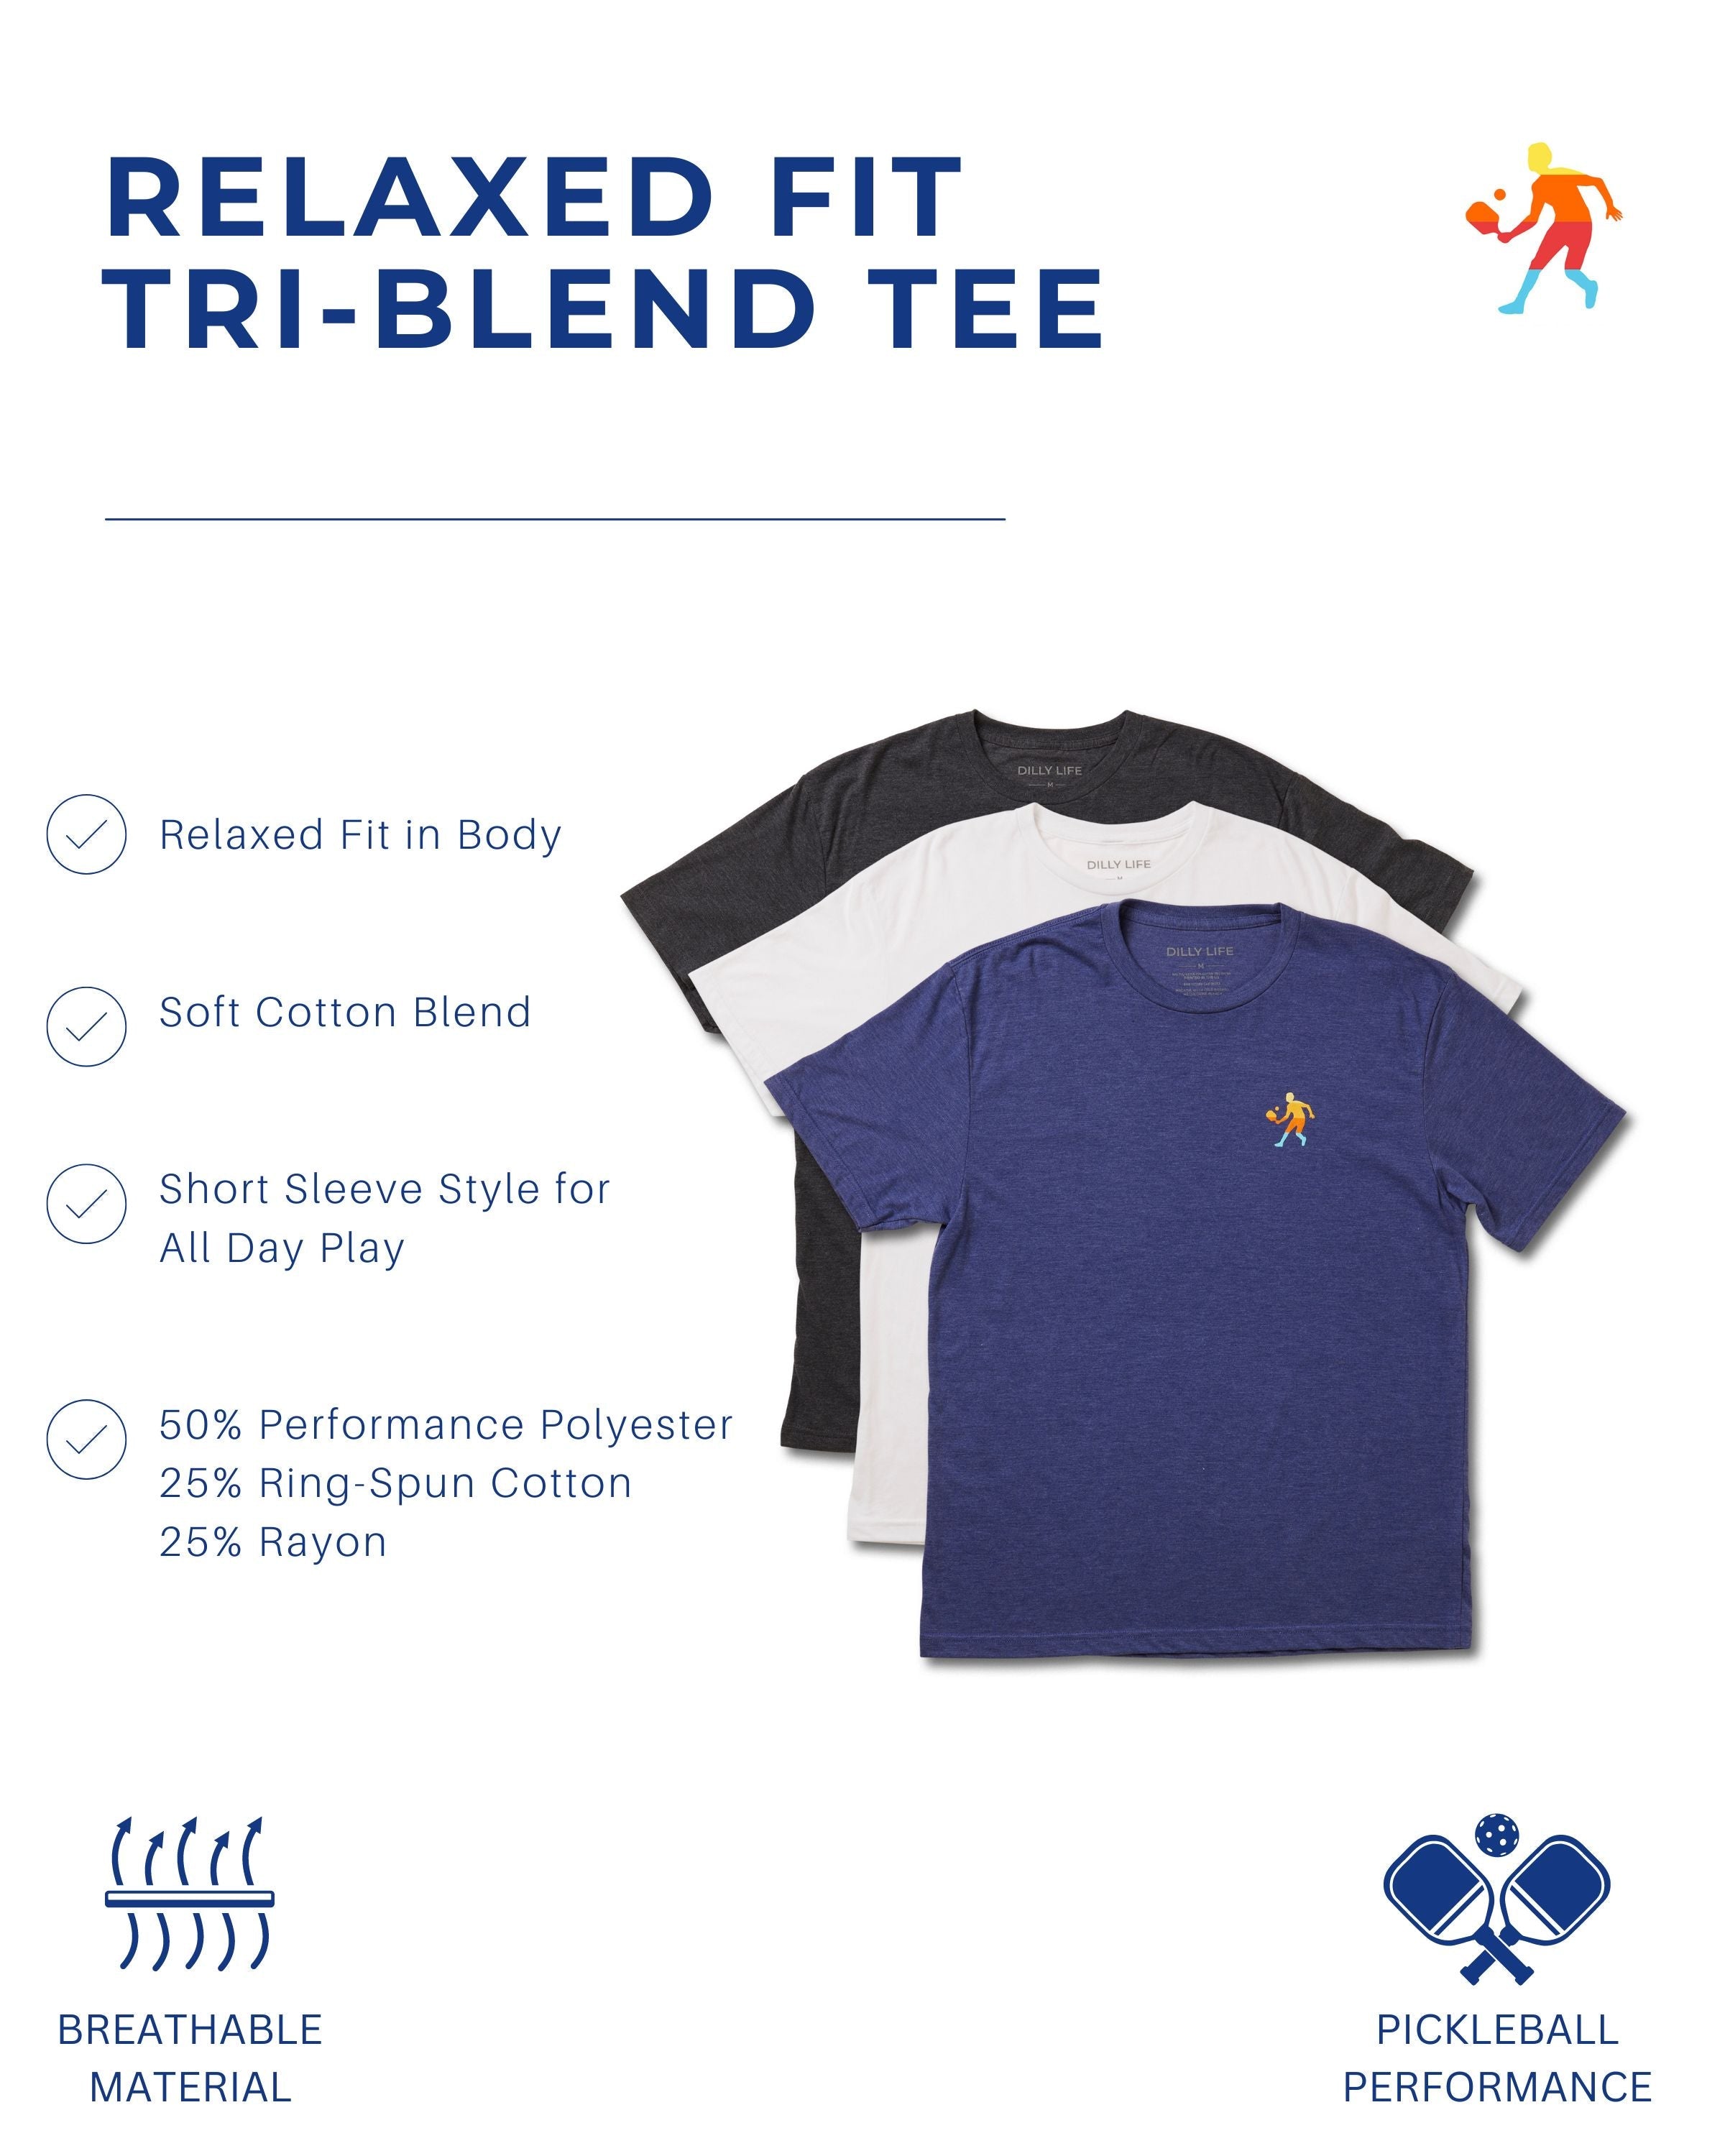 Relaxed Fit Tri-Blend Tee